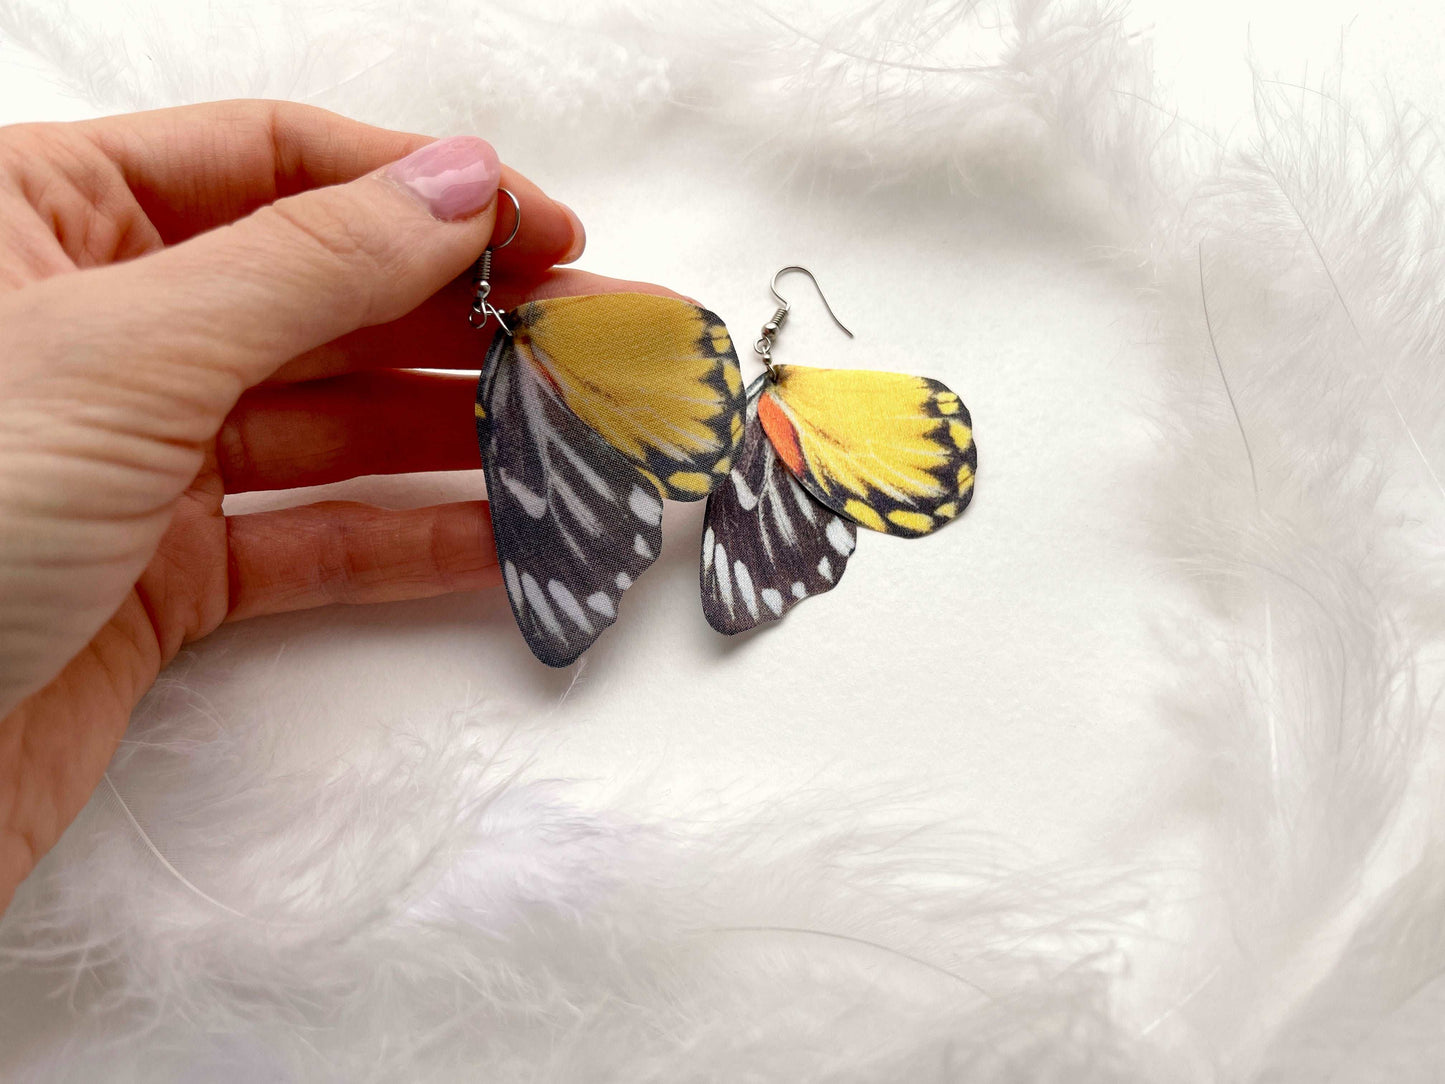 Unusual Earrings with Intricate Butterfly Wings design